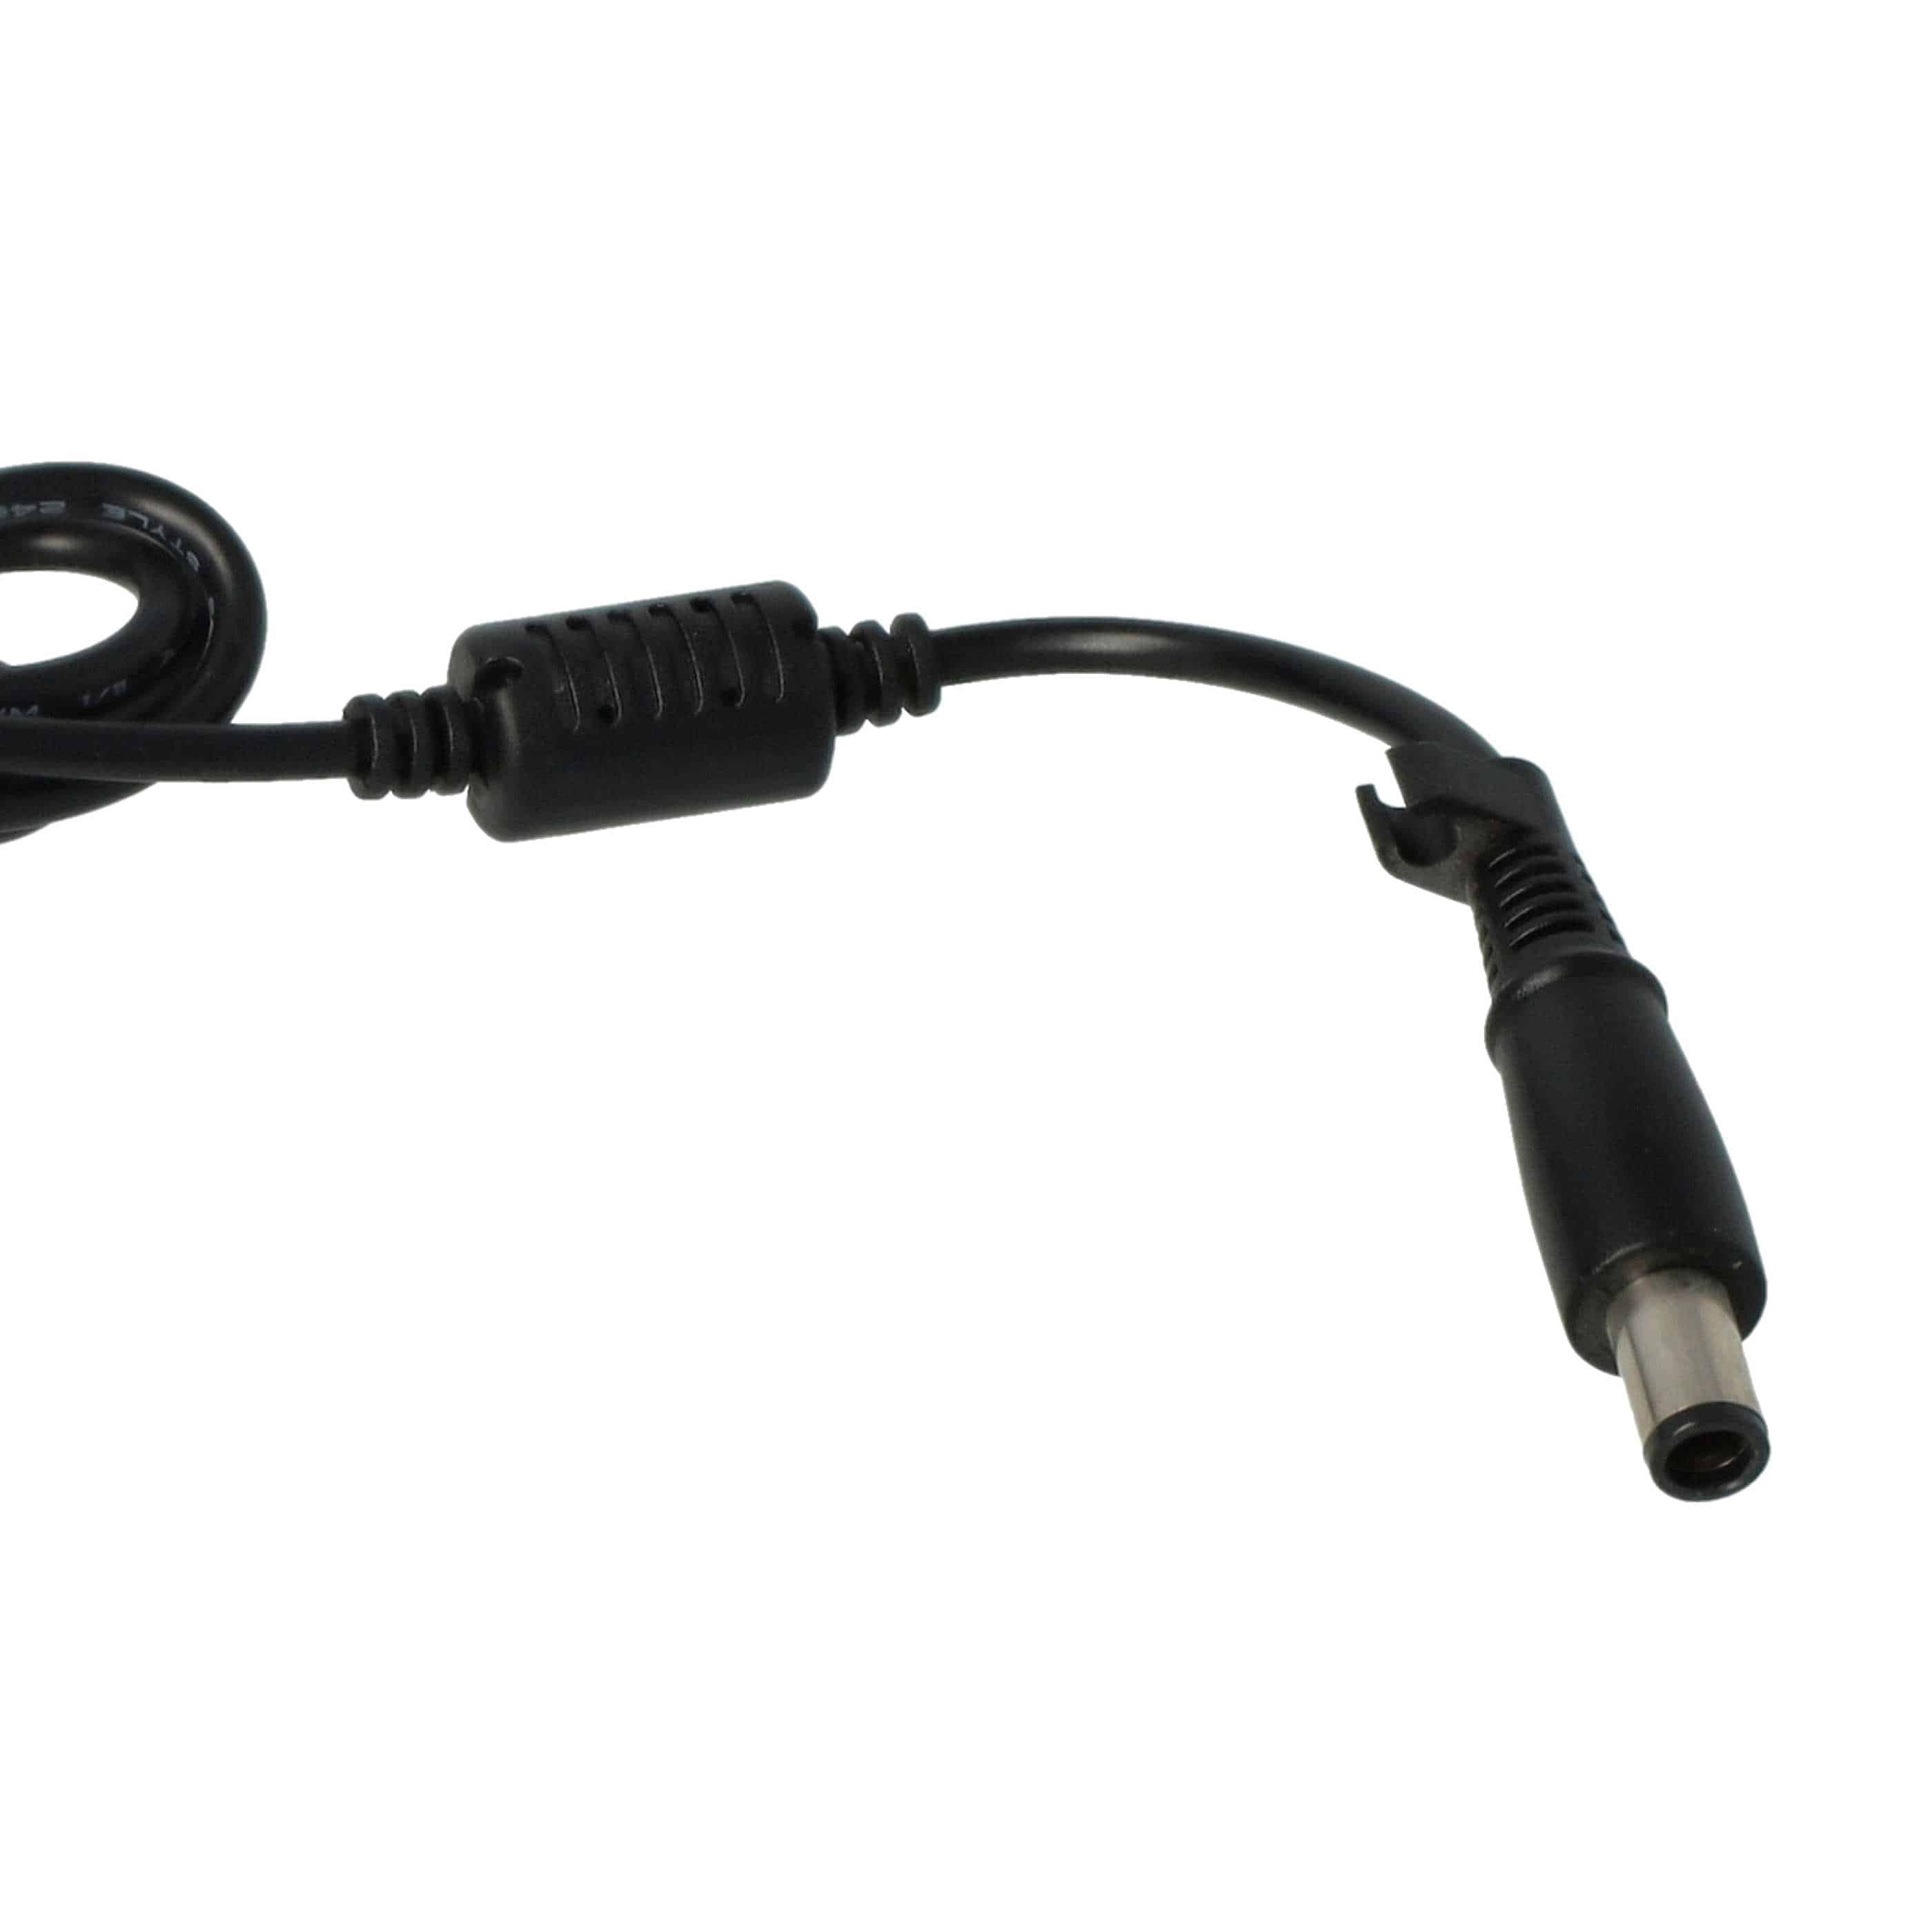 Cable carga coche reemplaza Dell 0RM805, 0F266, 310-2862, 0RM809, 09T215, 02H098 para notebook - 4.62 A